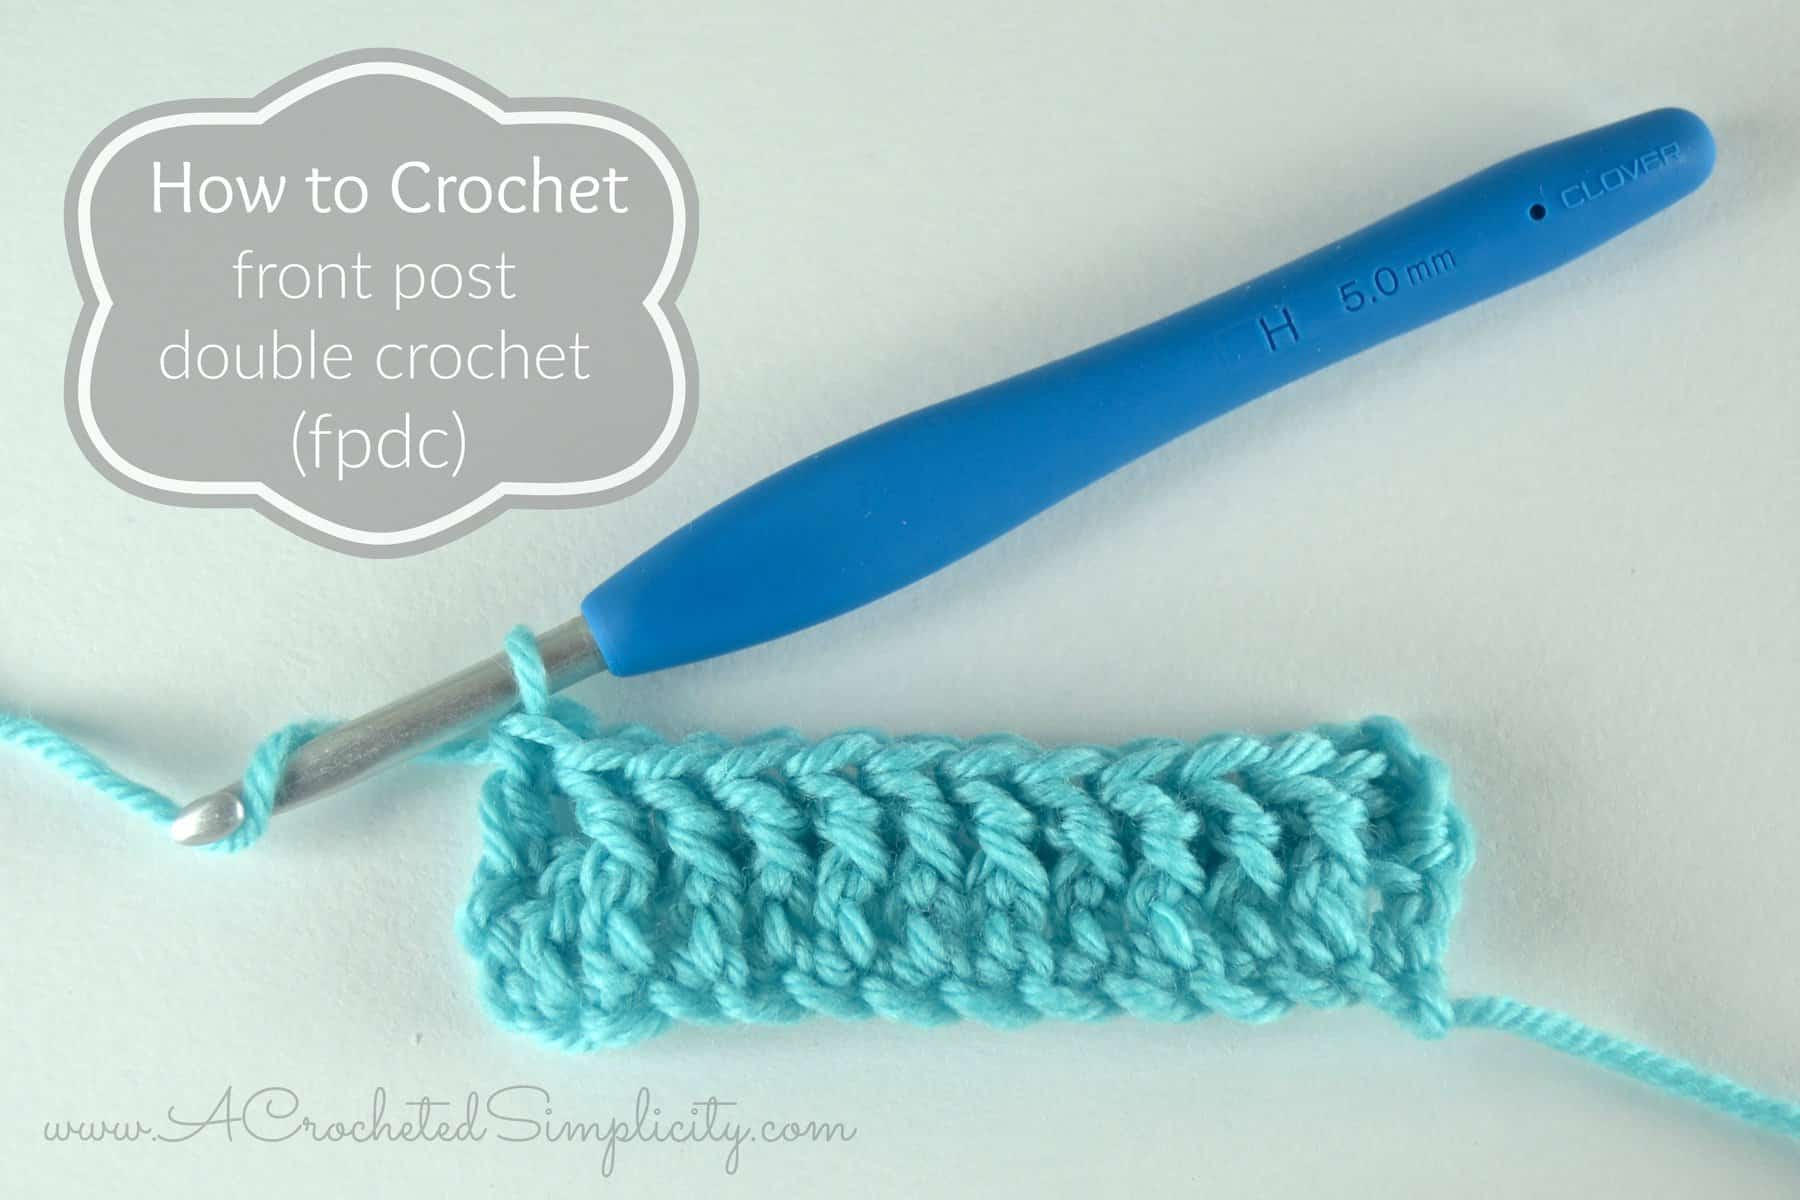 How to Crochet - Front Post Double Crochet Stitch (fpdc) (photo & video tutorial) by A Crocheted Simplicity #poststitches #crochetstitches #freecrochettutorial #crochetvideotutorial